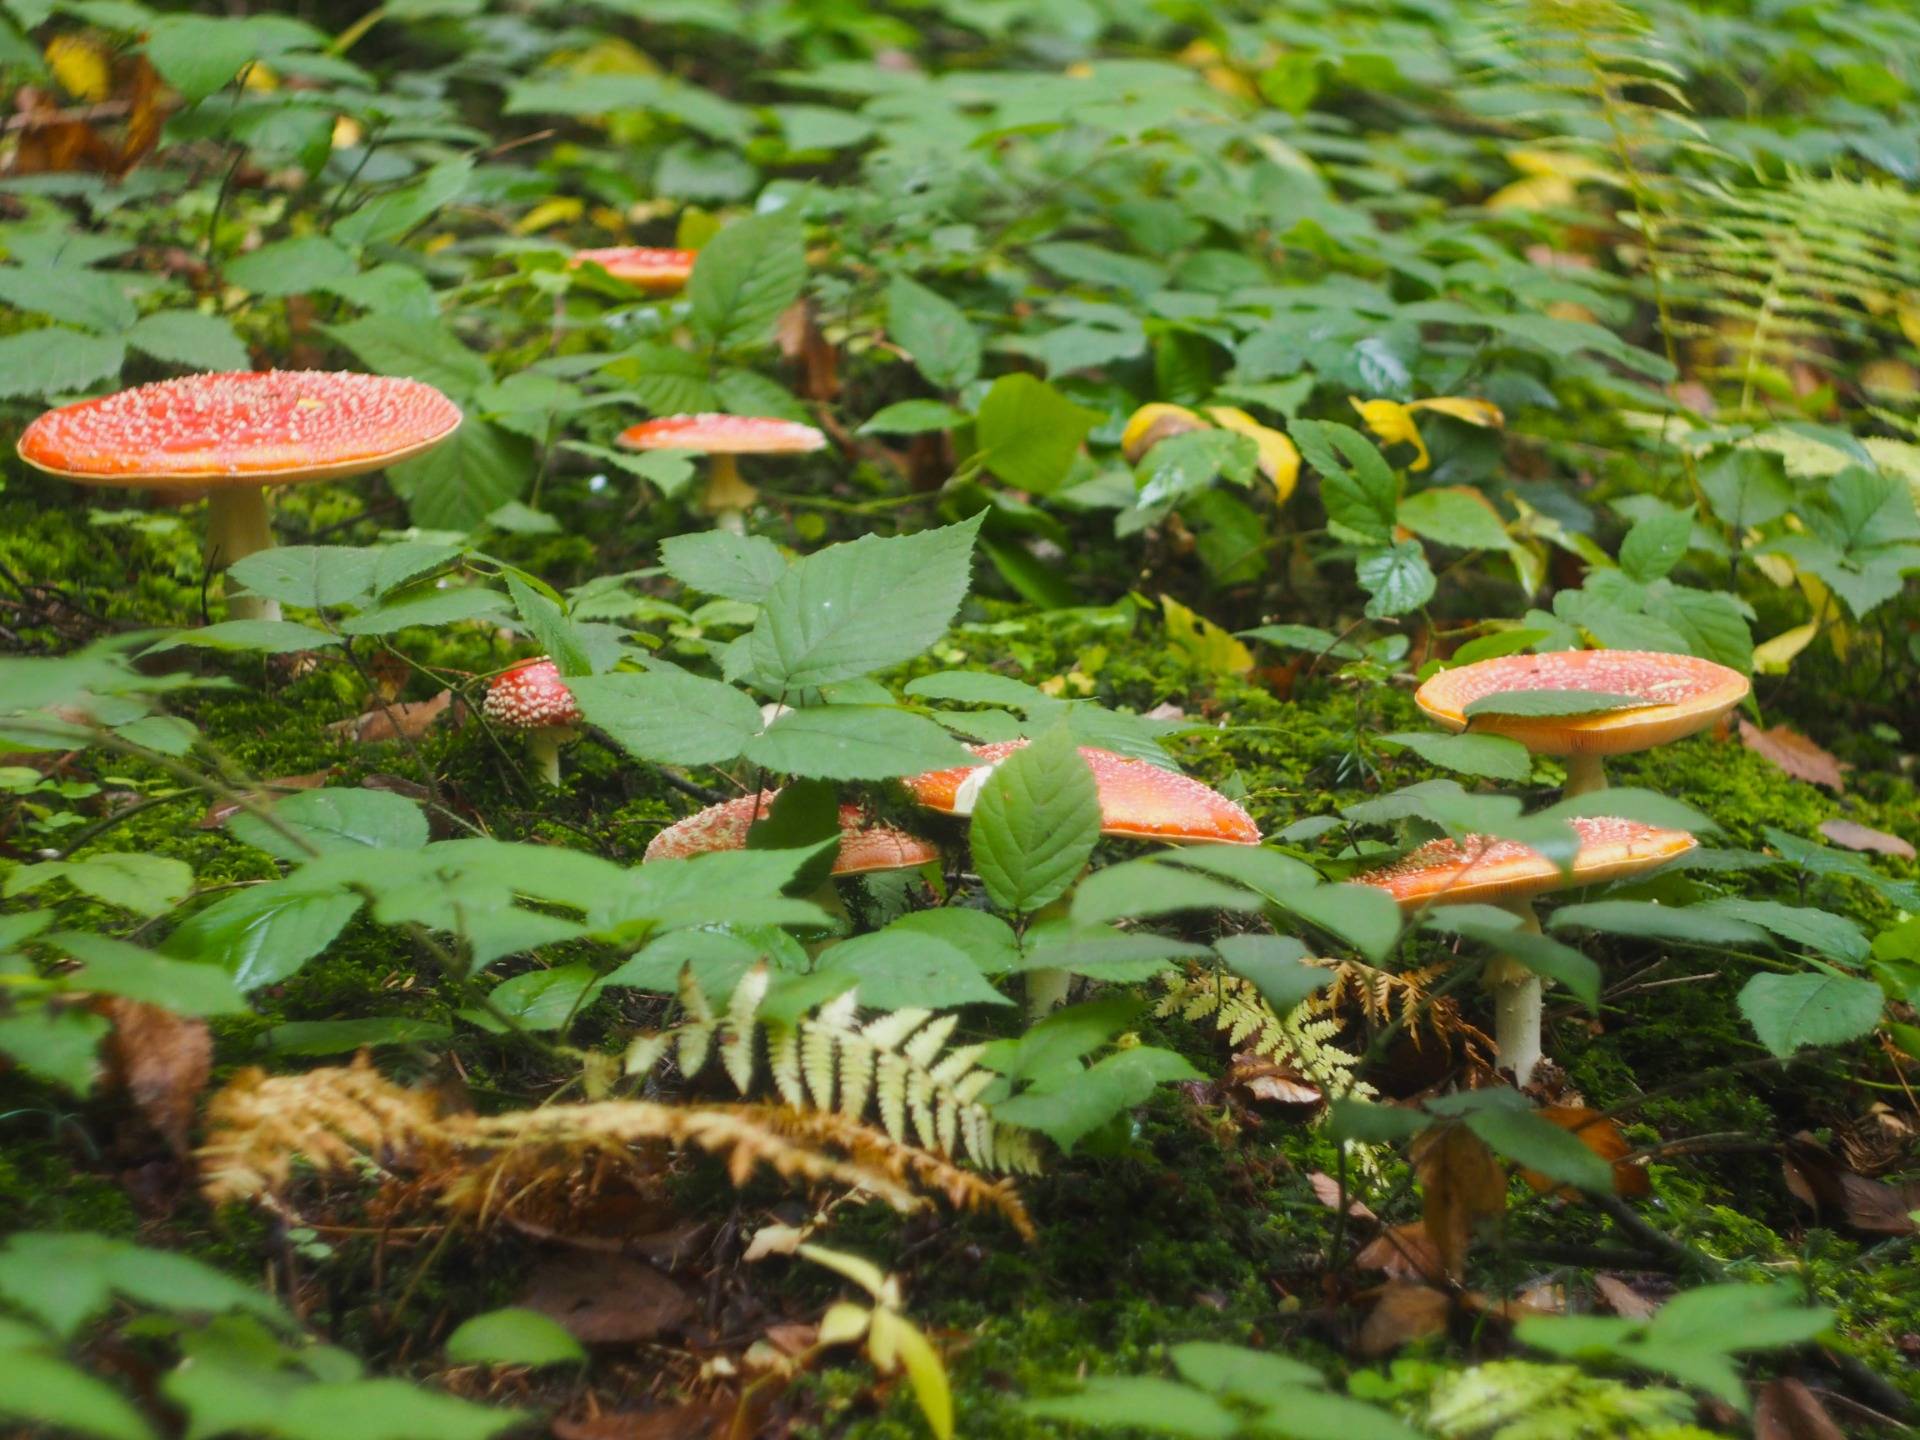 There were so many poisonous red fly agarics in the forest at the time